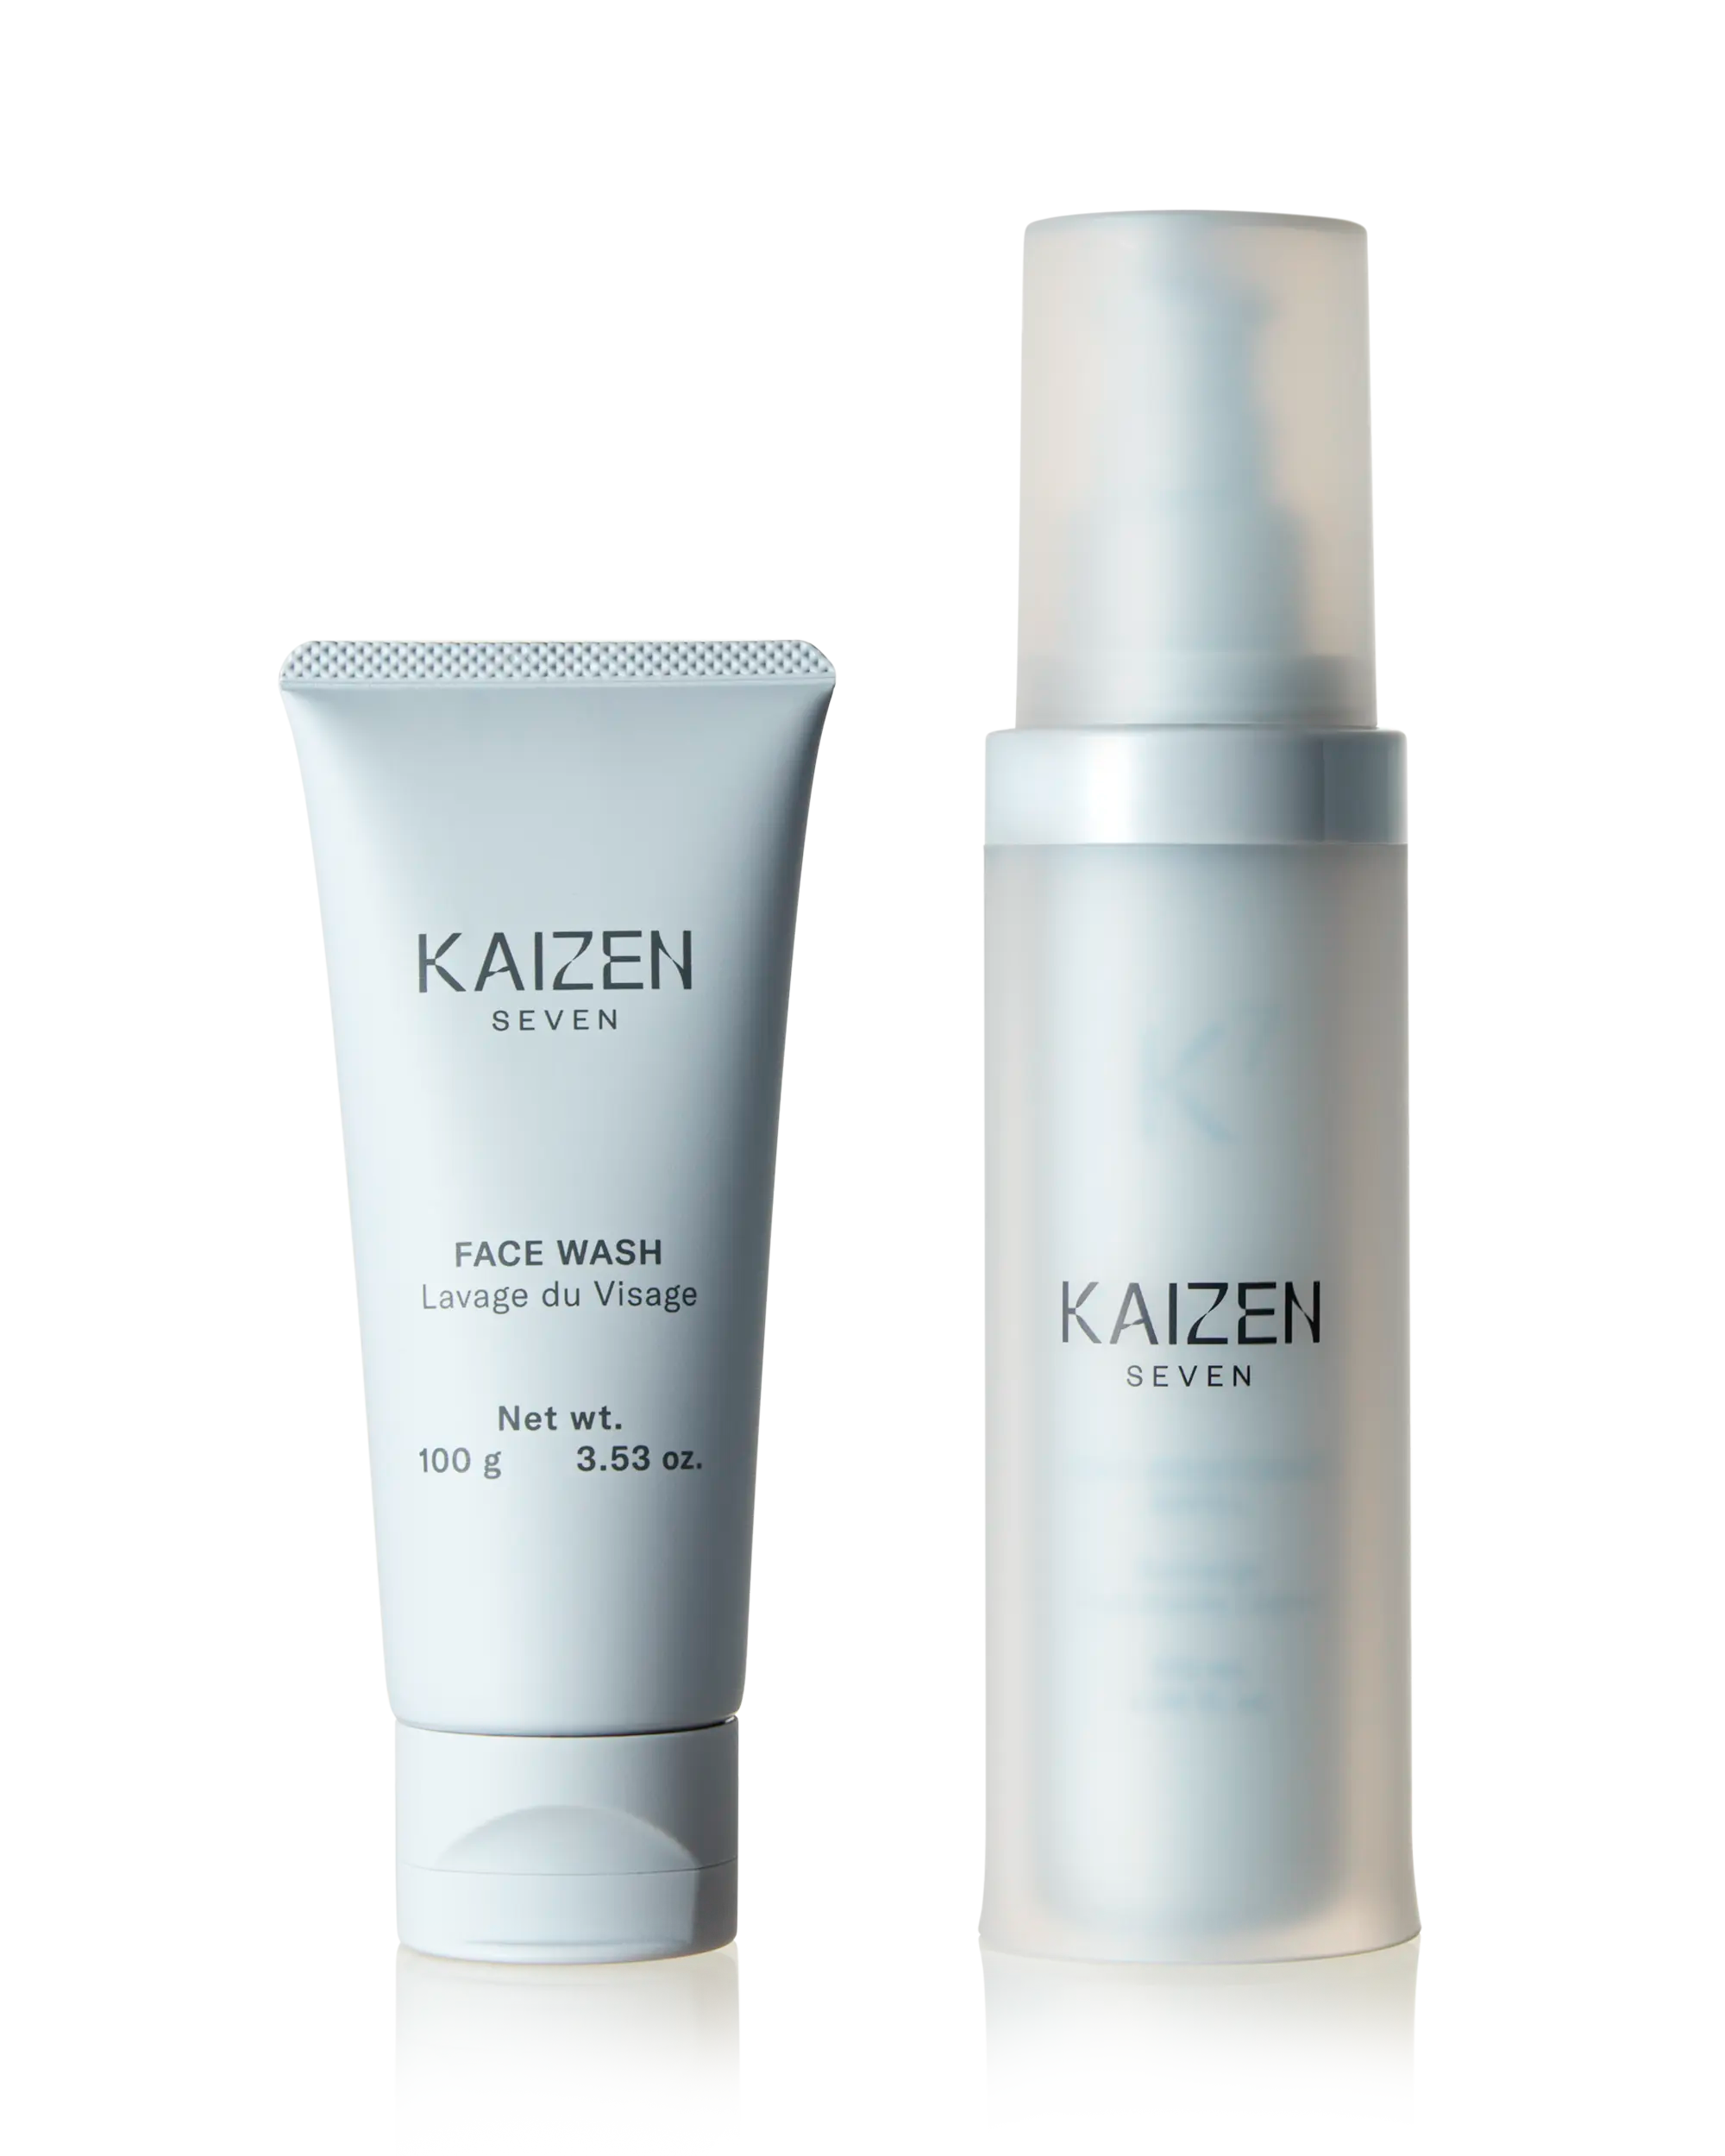 Photo of Kaizen Seven Face Wash and Light Moisturizer products standing beside eachother